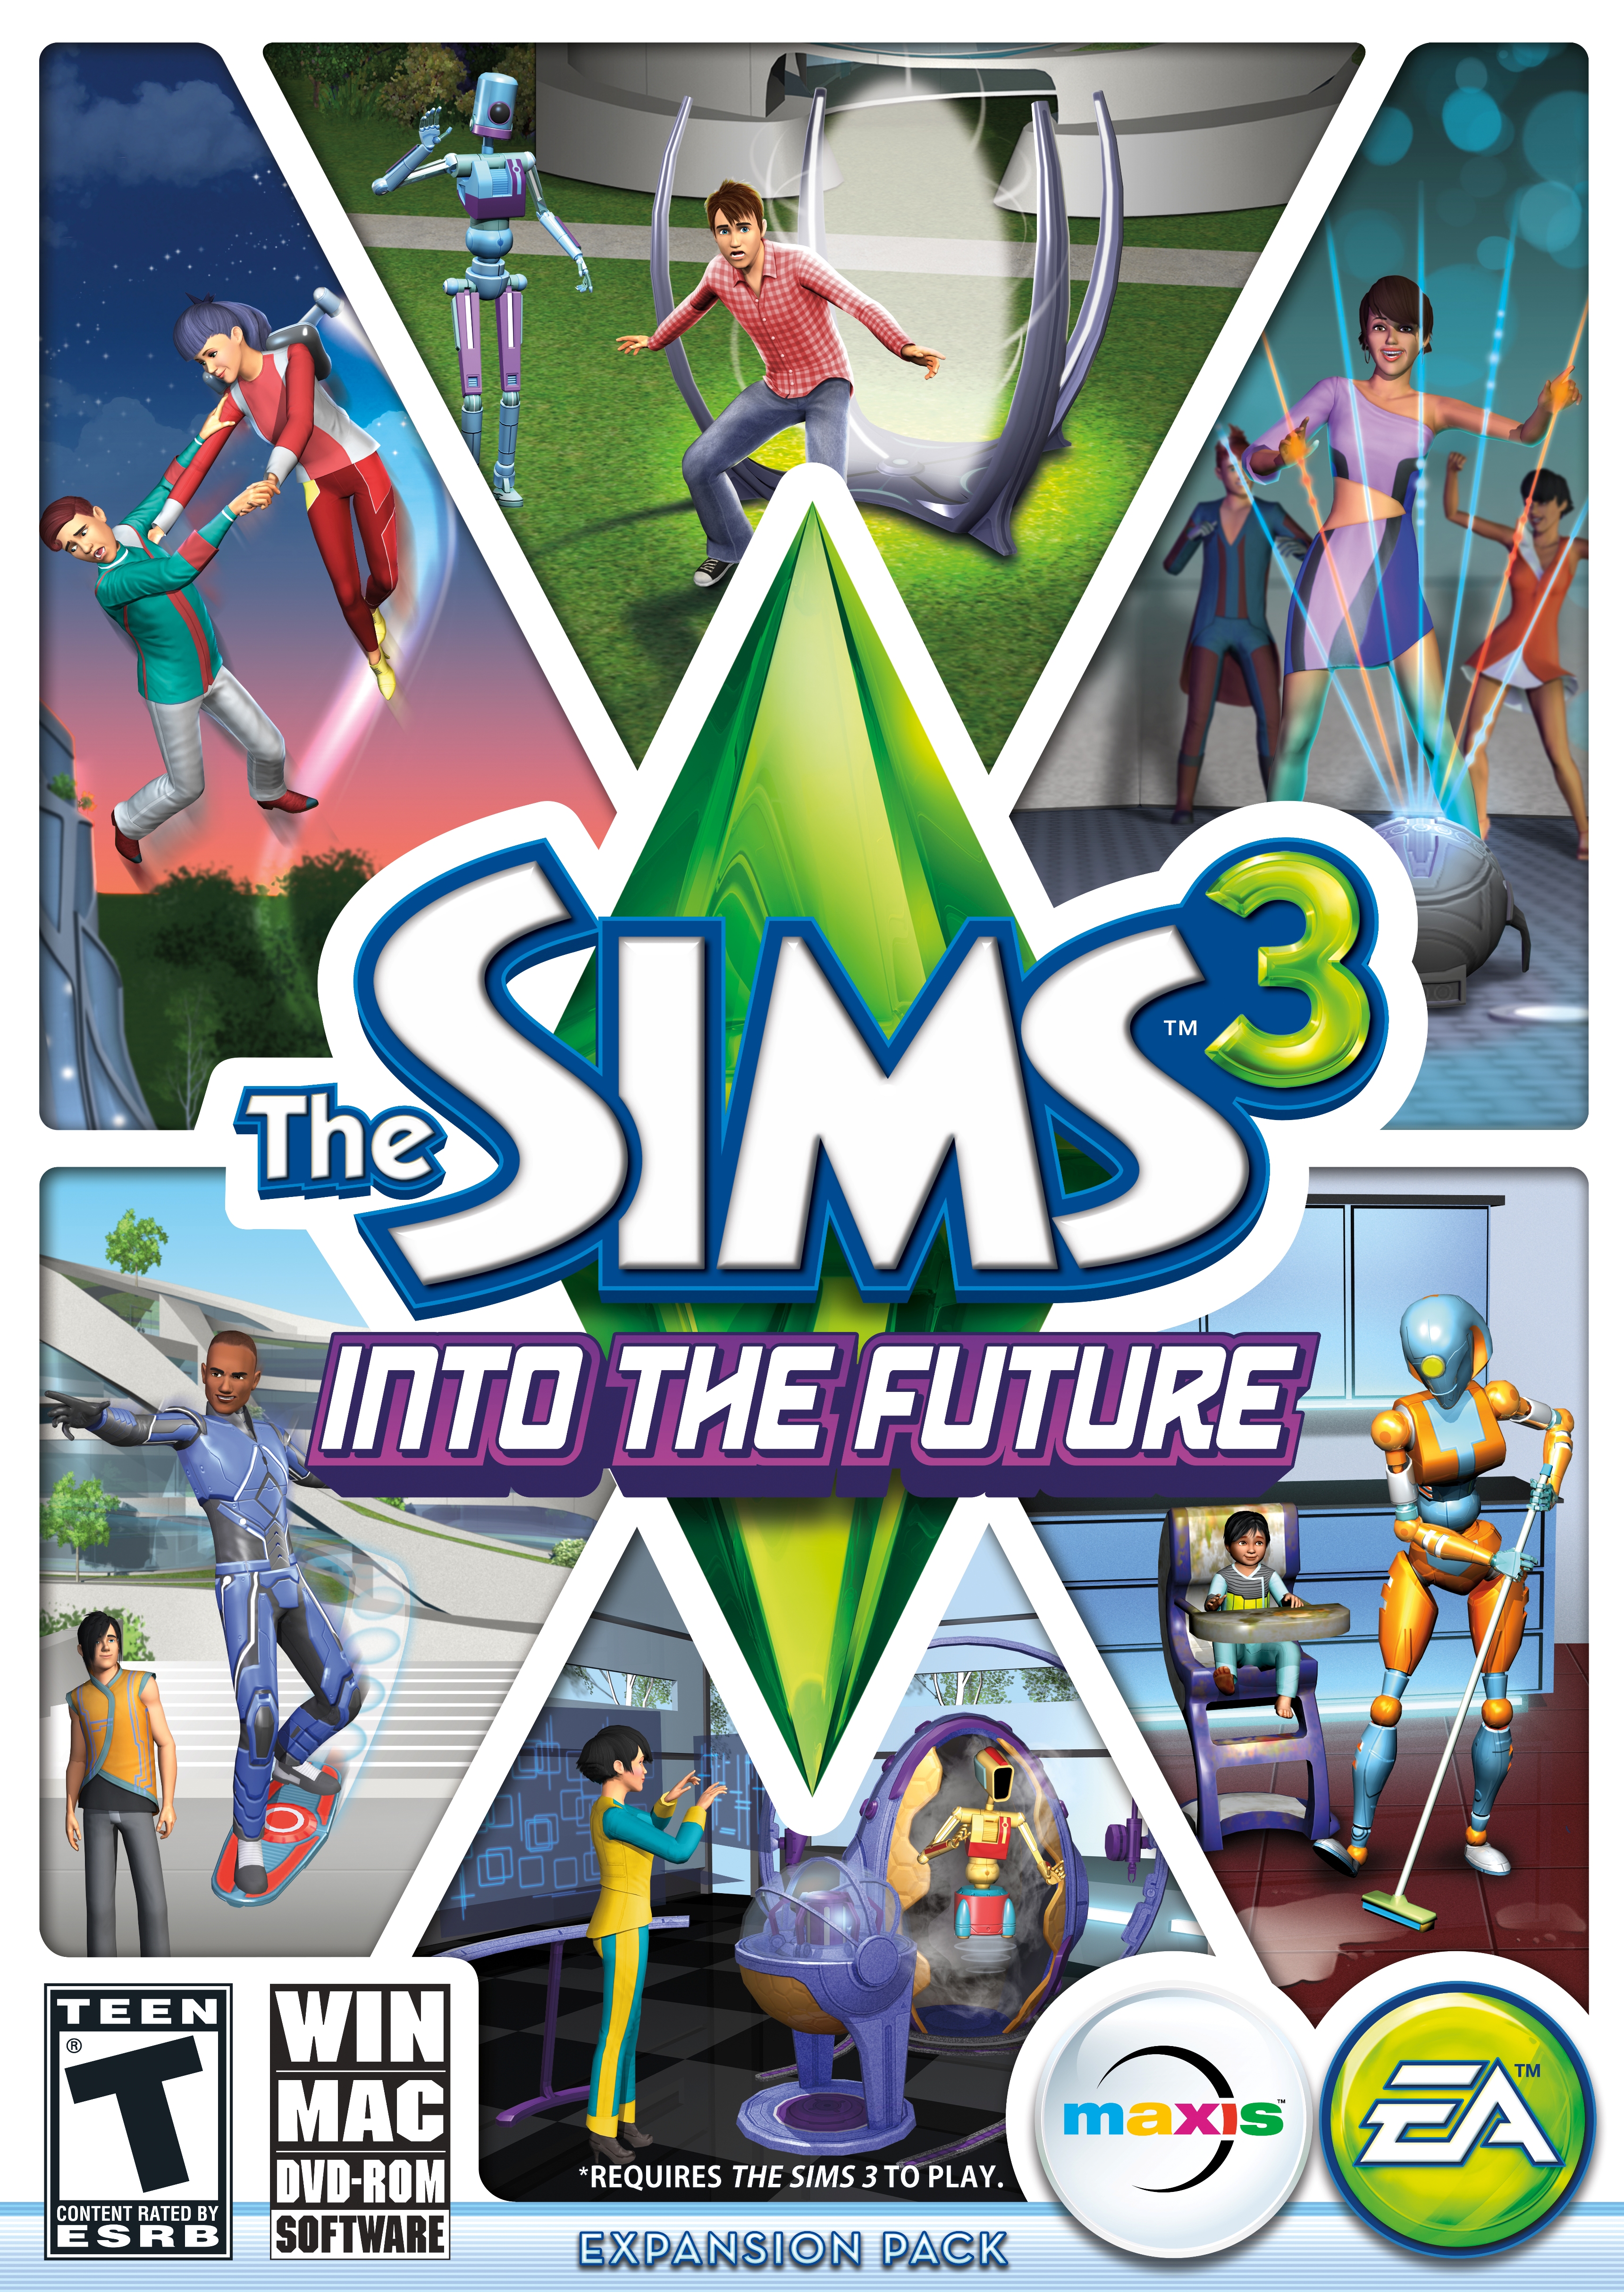 sims 3 into the future keygen